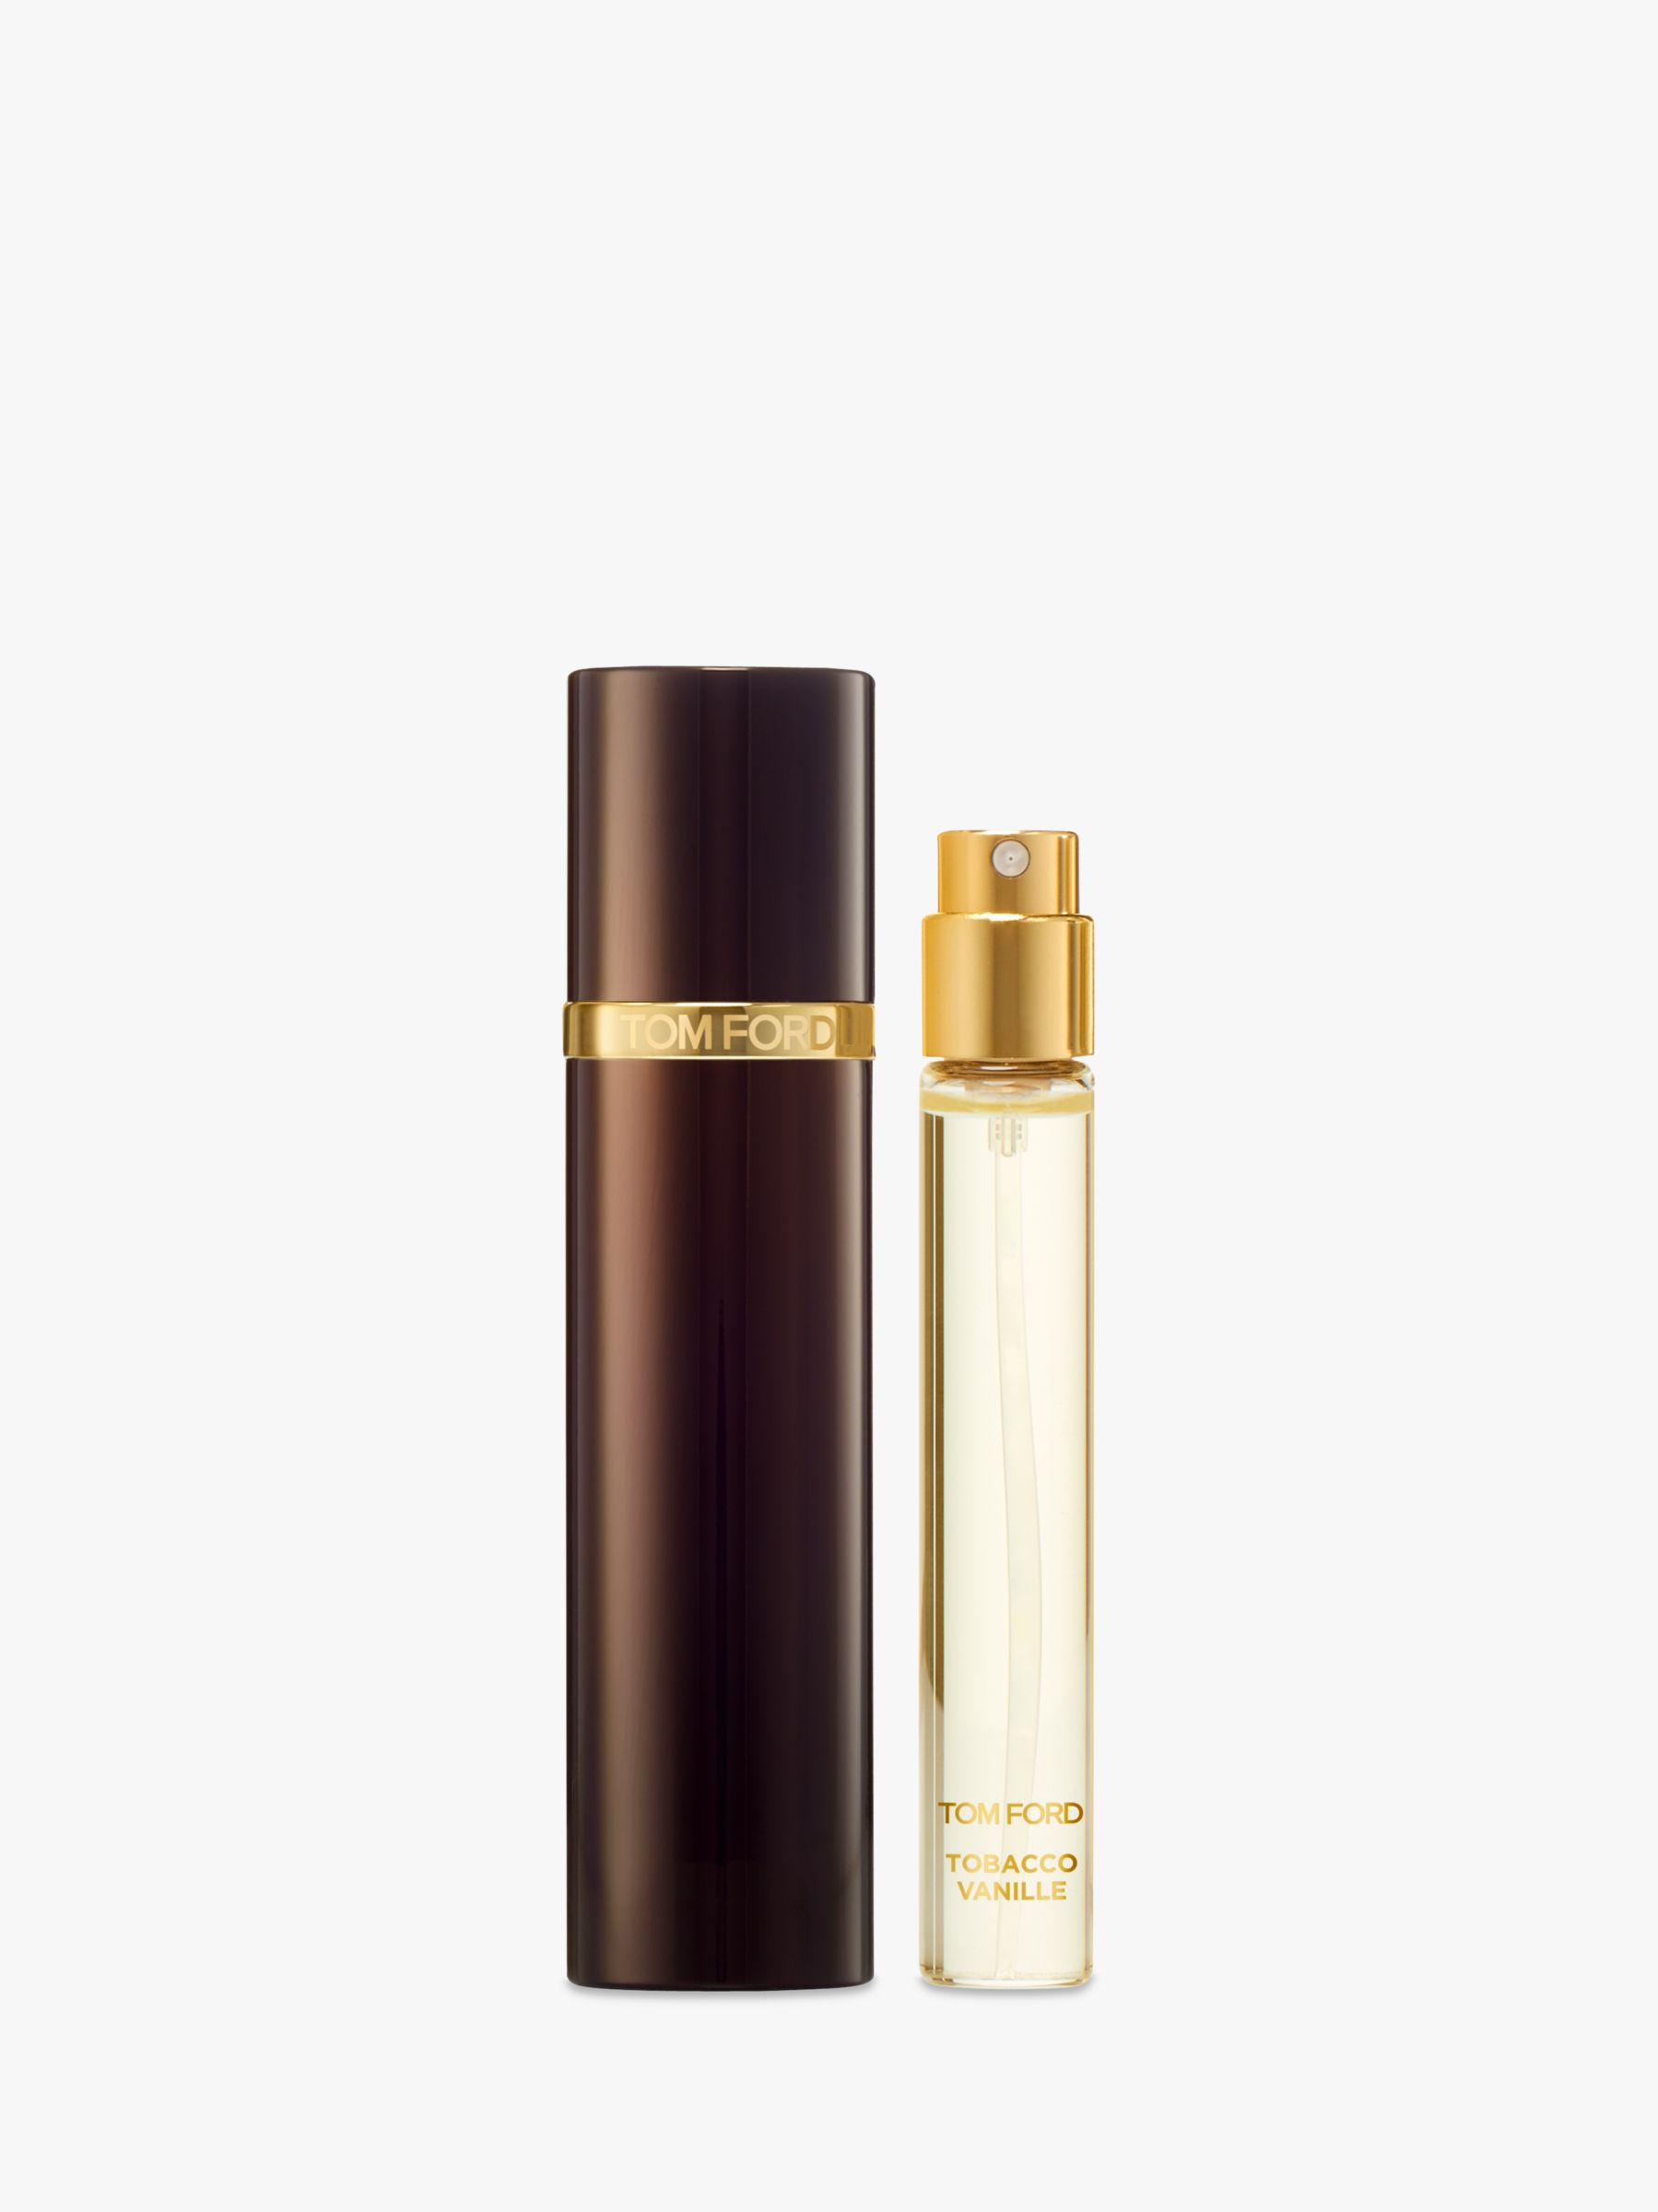 TOM FORD TABACCO VANILLE30ml